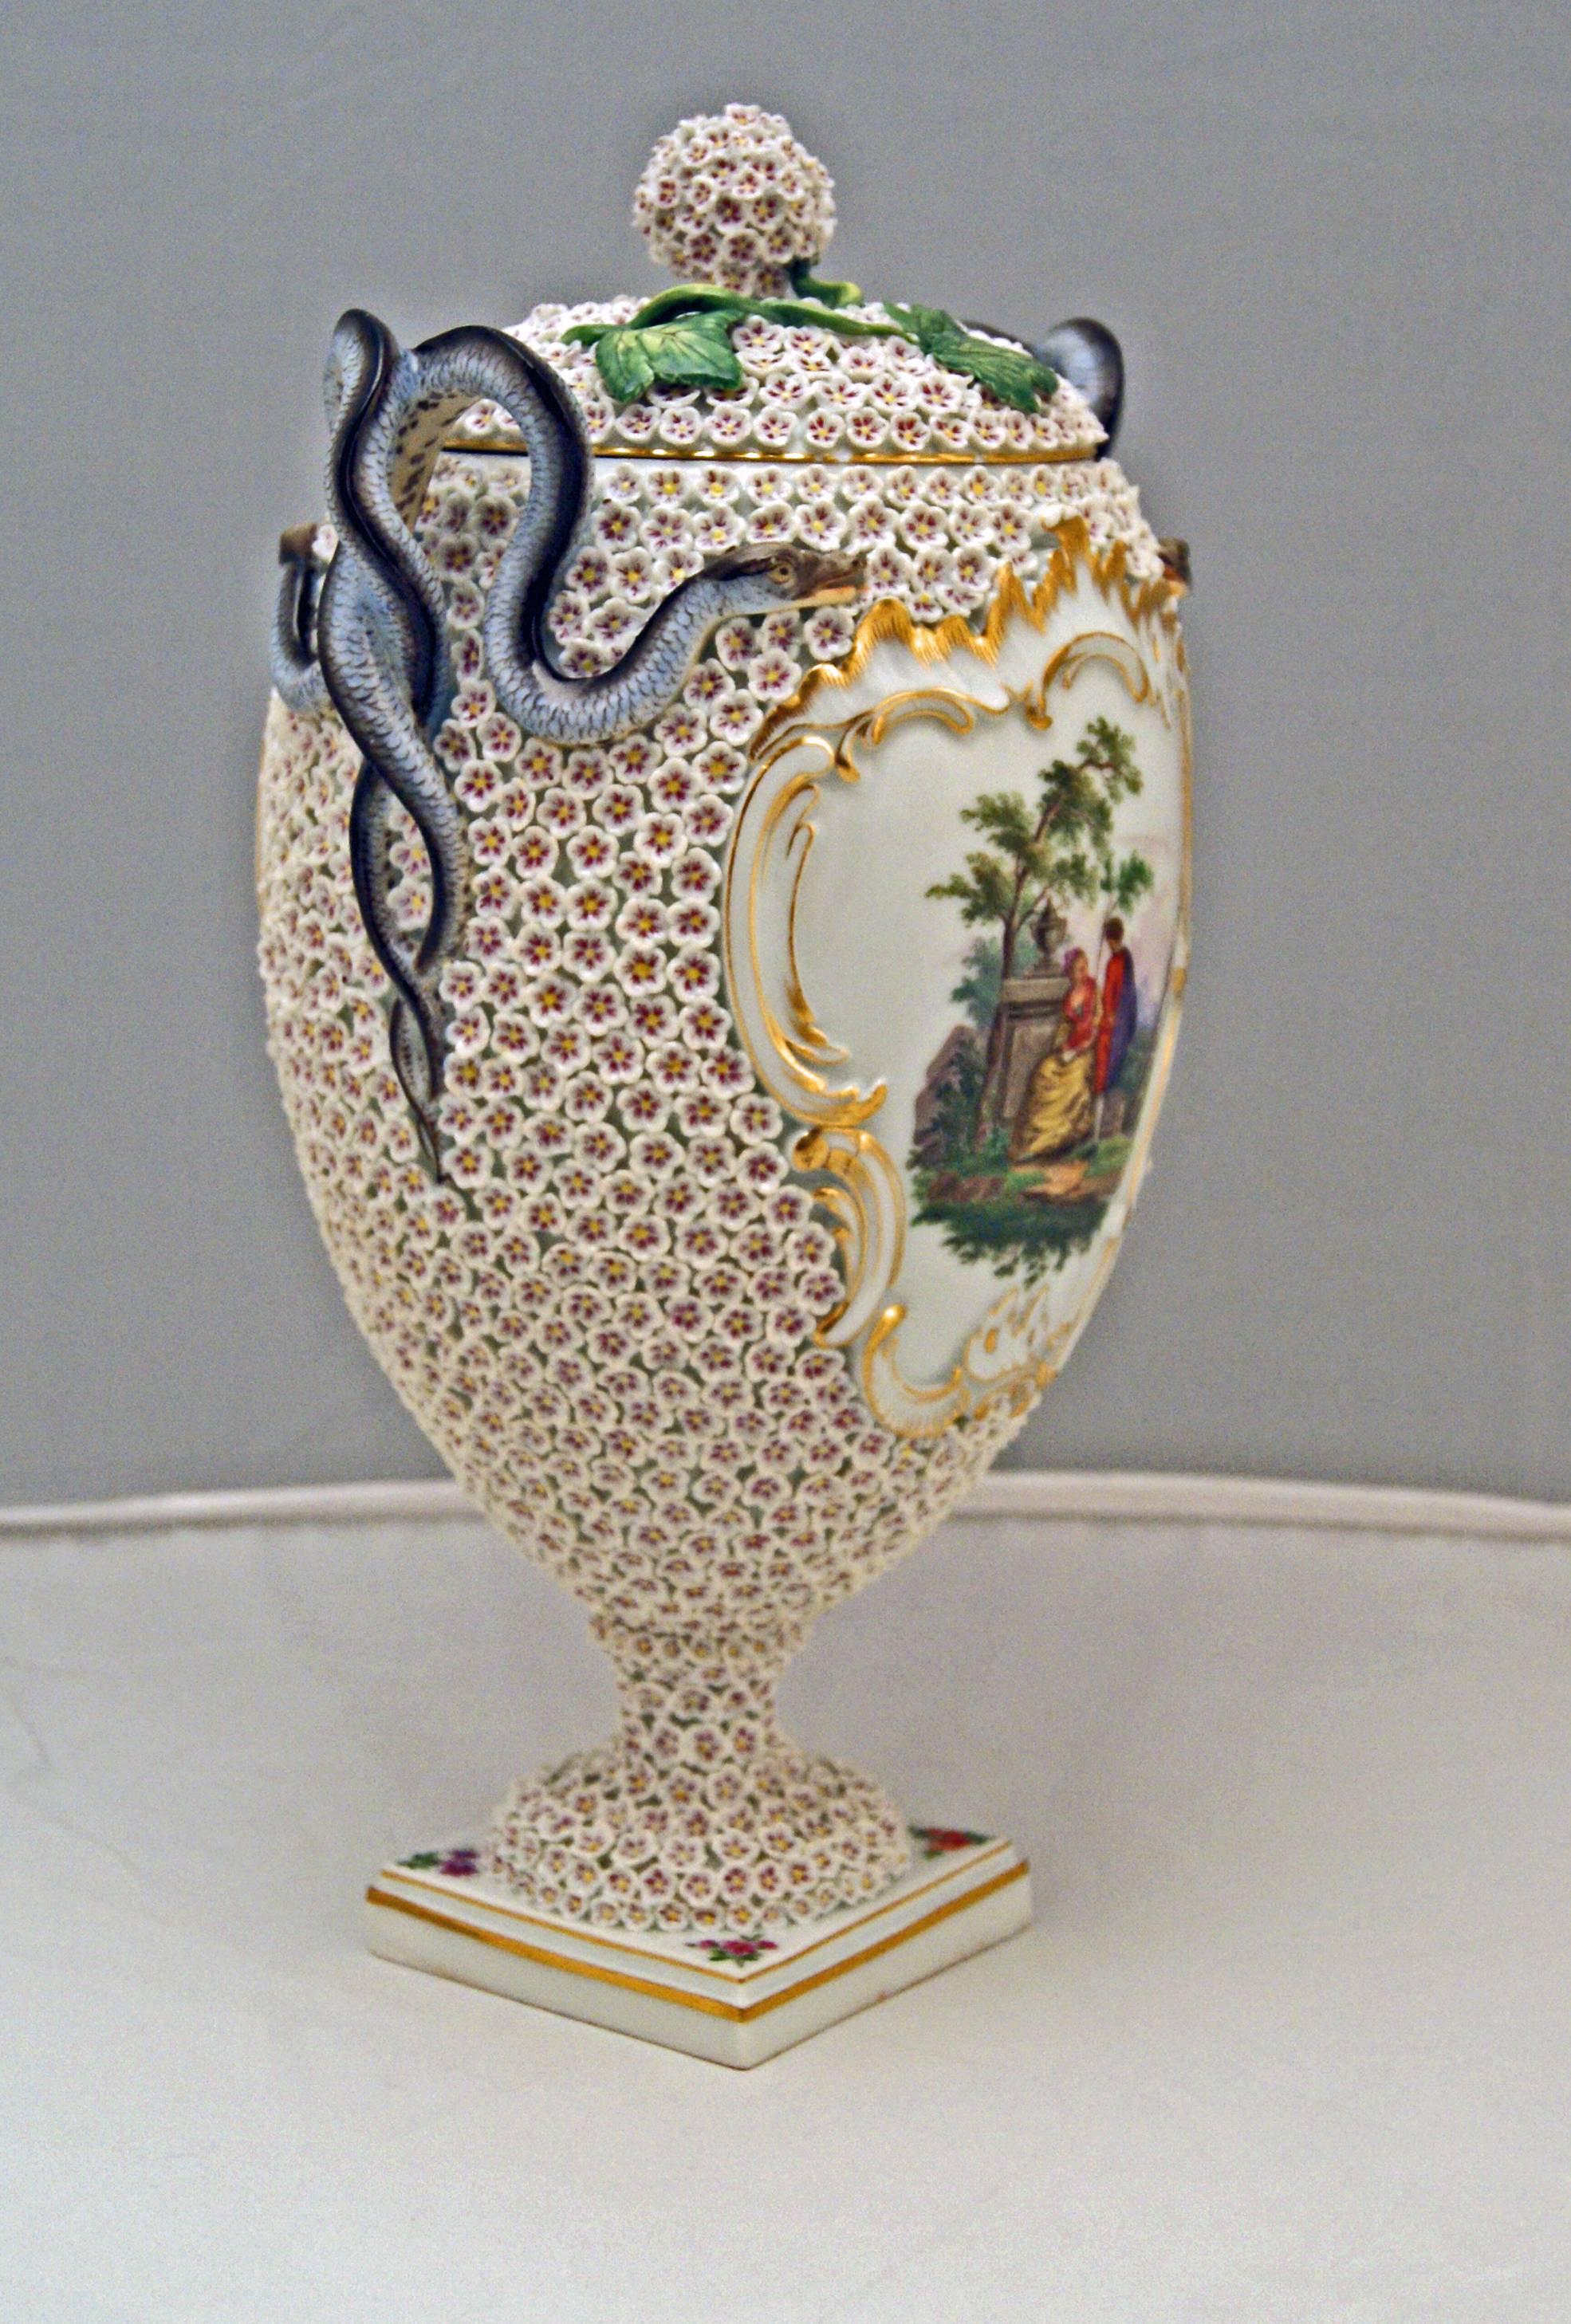 Meissen most remarkable vase:
Quite tall goblet snowball vase with round foot attached to plinth

Measures / dimensions:
Total height 11.41 inches / 29.0 cm
Diameter of vase's mouth 3.74 inches / 9.5 cm

Manufactory: Meissen
Hallmarked: Blue